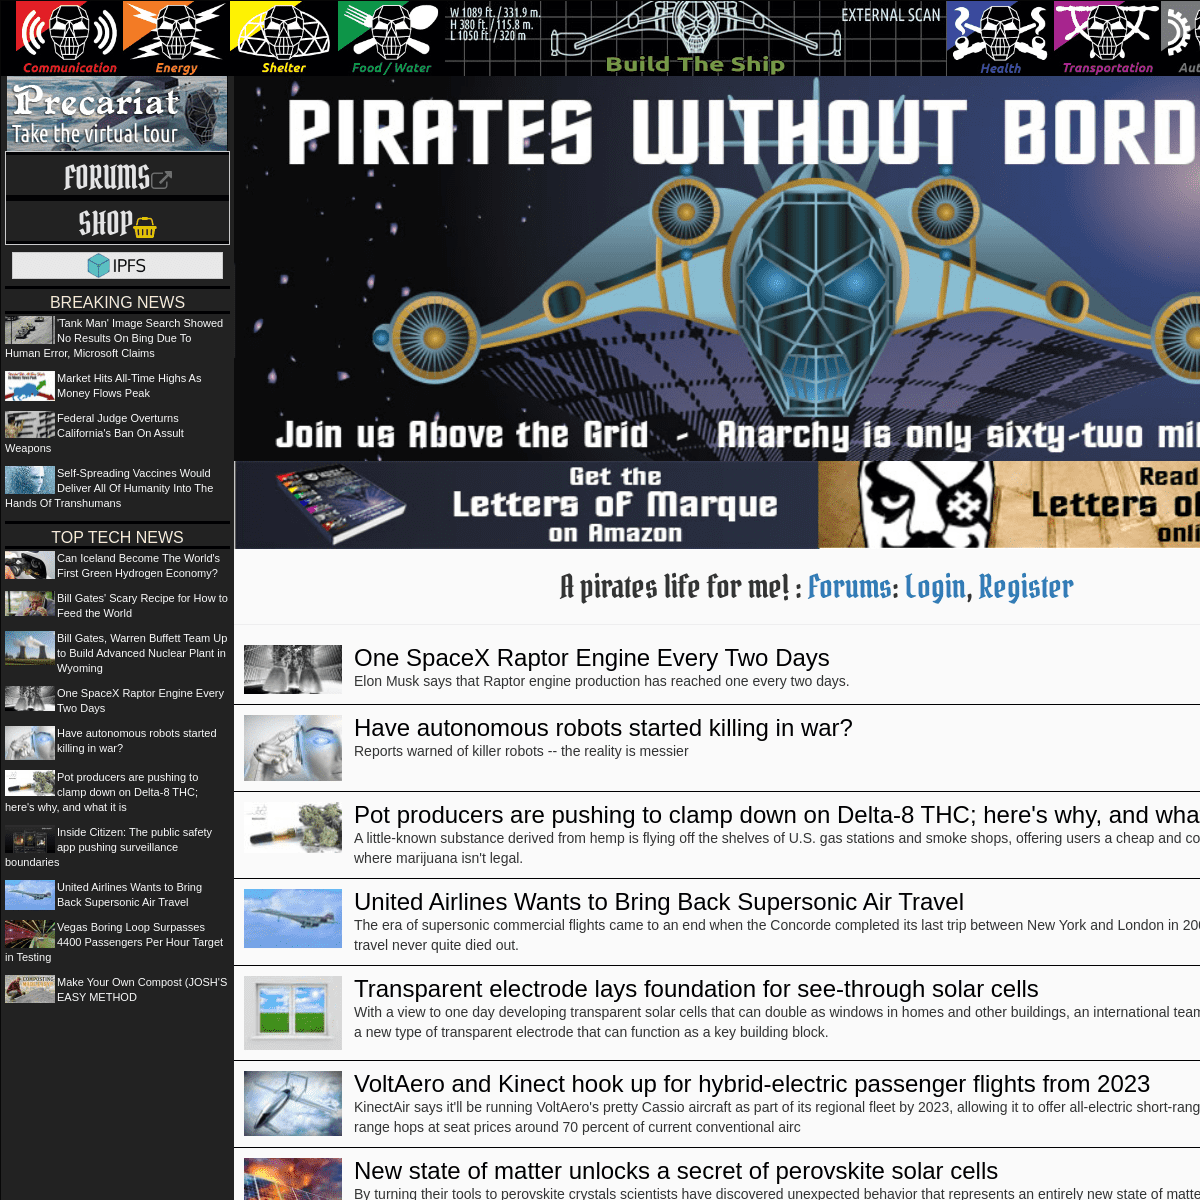 A complete backup of https://pirateswithoutborders.com